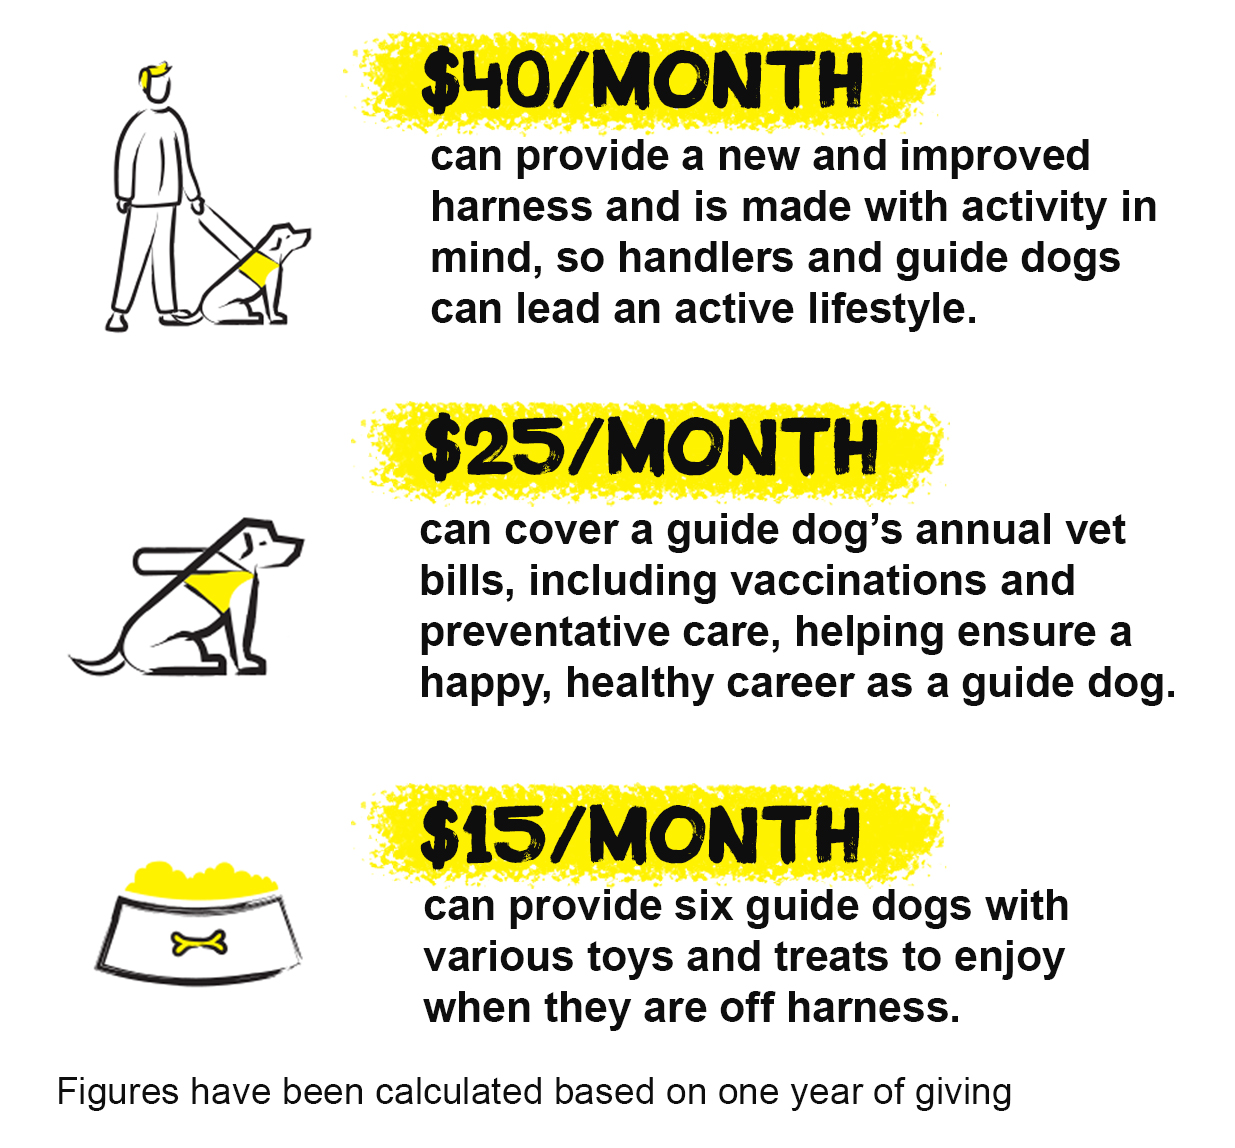 $40 per month can provide a new and improved harness and is made with activity in mind, so handlers and guide dogs can lead an active lifestyle. $25 per month can cover a guide dog's annual vet bills, including vaccinations and preventative care, helping ensure a happy, healthy career as a guide dog. $15 per month can provide six guide dogs with various toys and treats to enjoy when they are off harness. Figures have been calculated based on one year of giving.